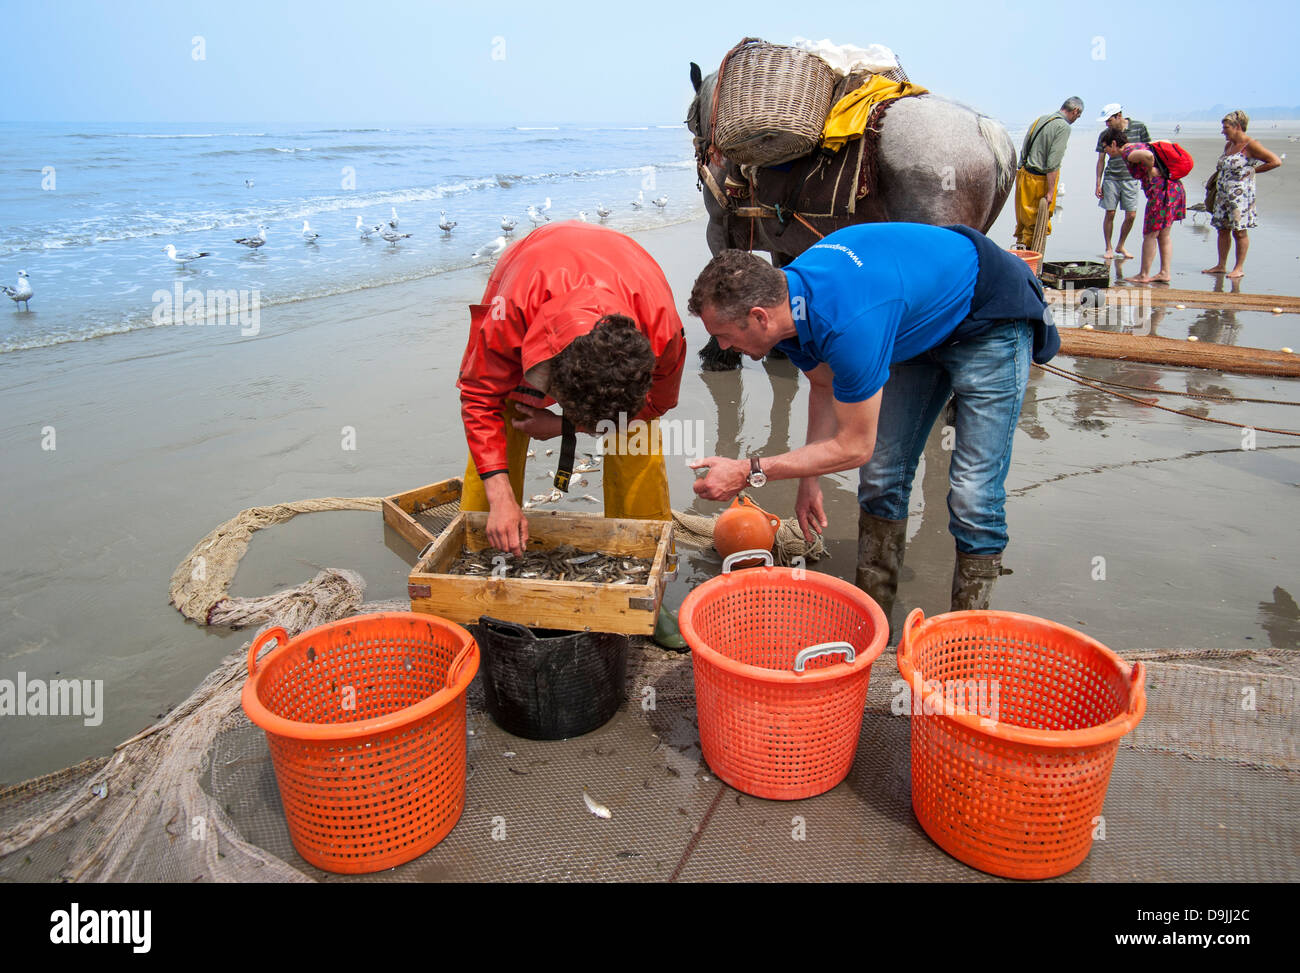 Shrimpers selecting shrimps with sieve on beach after fishing with draught horse along North Sea coast, Oostduinkerke, Belgium Stock Photo